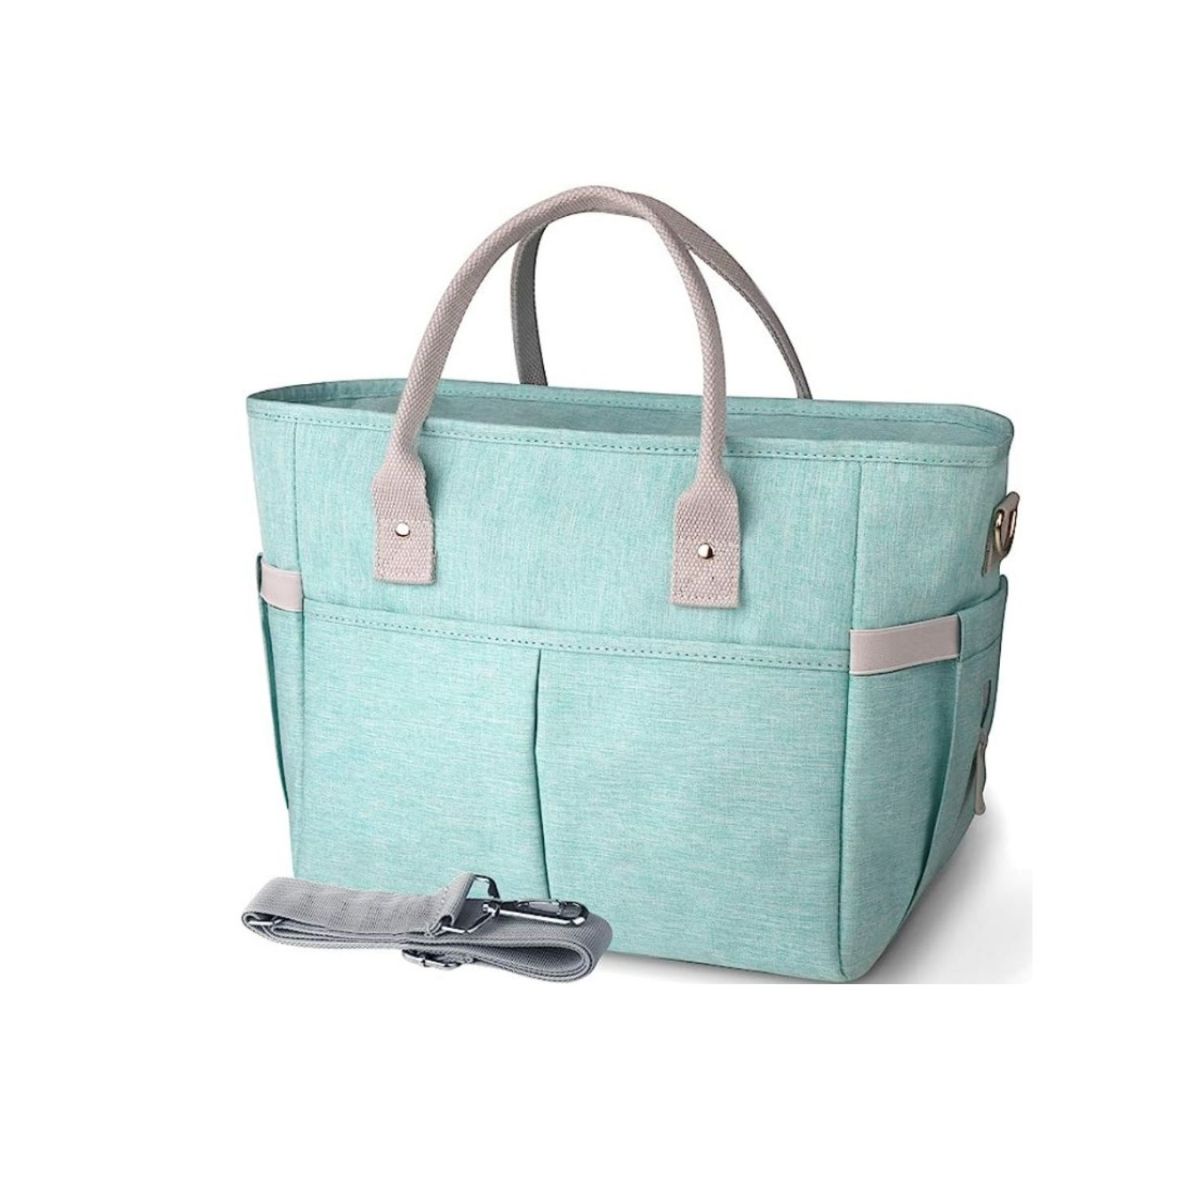 Turquoise lunchbox with grey trim